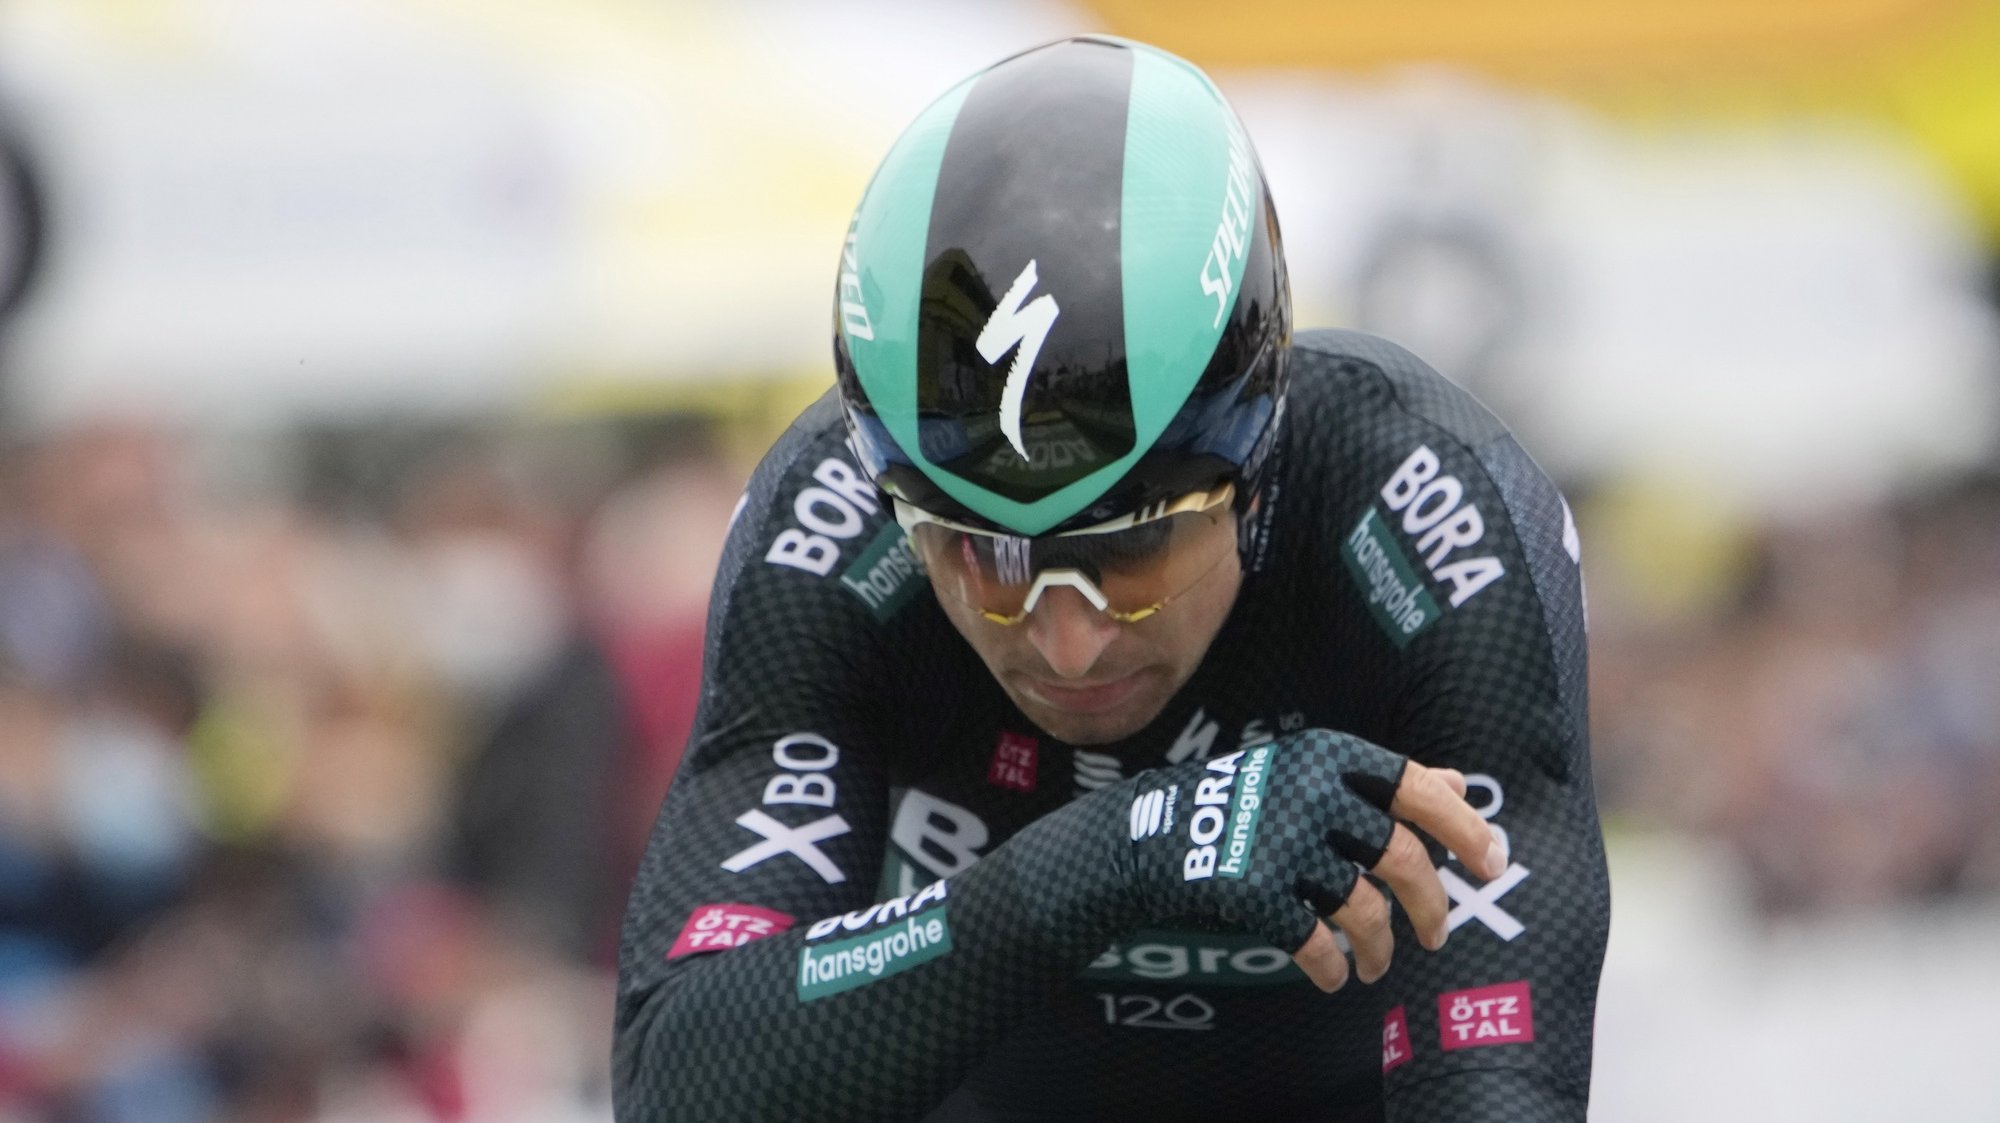 epa09313309 Slovakian rider Peter Sagan of the Bora-Hansgrohe team crosses the finish line during the 5th stage of the Tour de France 2021, an individual time trial over 27.2 km from Change to Laval Espace Mayenne, France, 30 June 2021.  EPA/Christophe Ena / POOL